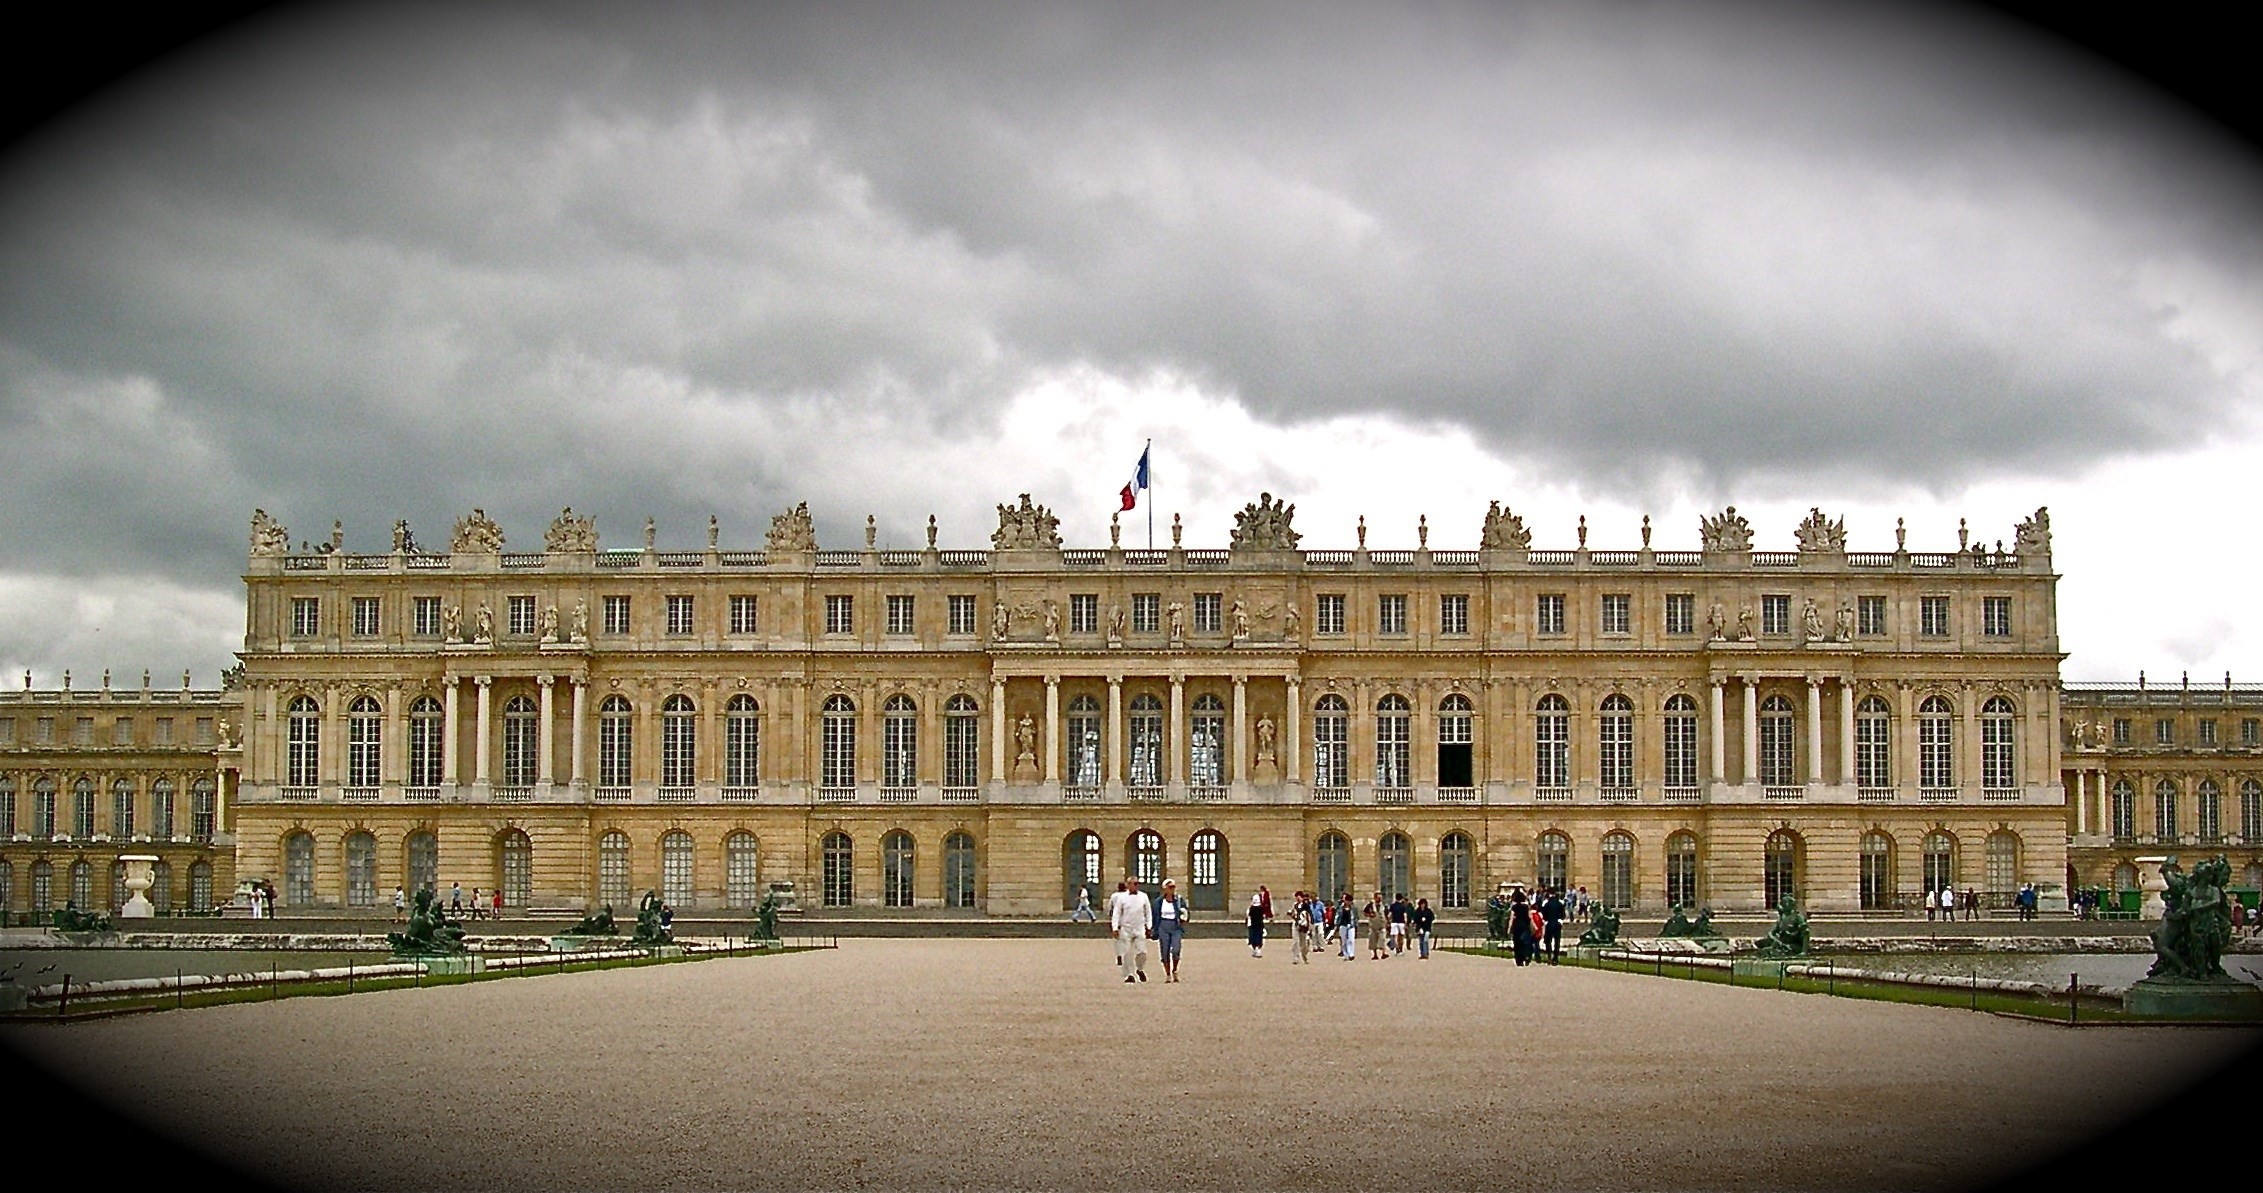 palace wallpaper hd,palace,building,estate,official residence,architecture